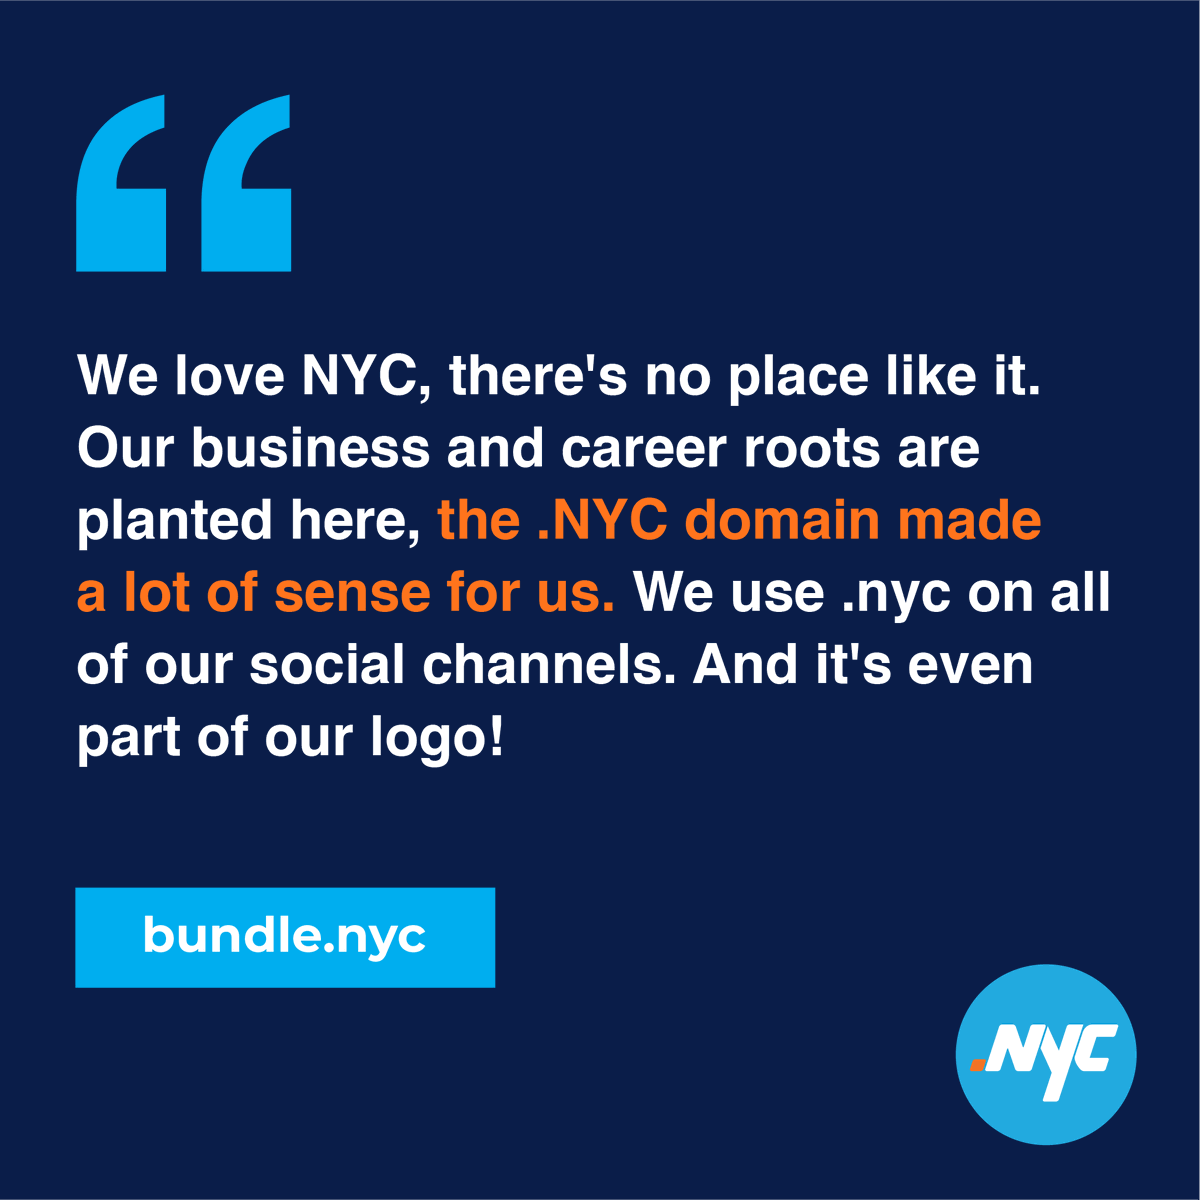 Bundle.nyc started building community by reaching out to New York moms who have their pulse on the latest trends and products. #nyc #dotnyc #digitalpresence #domainnames